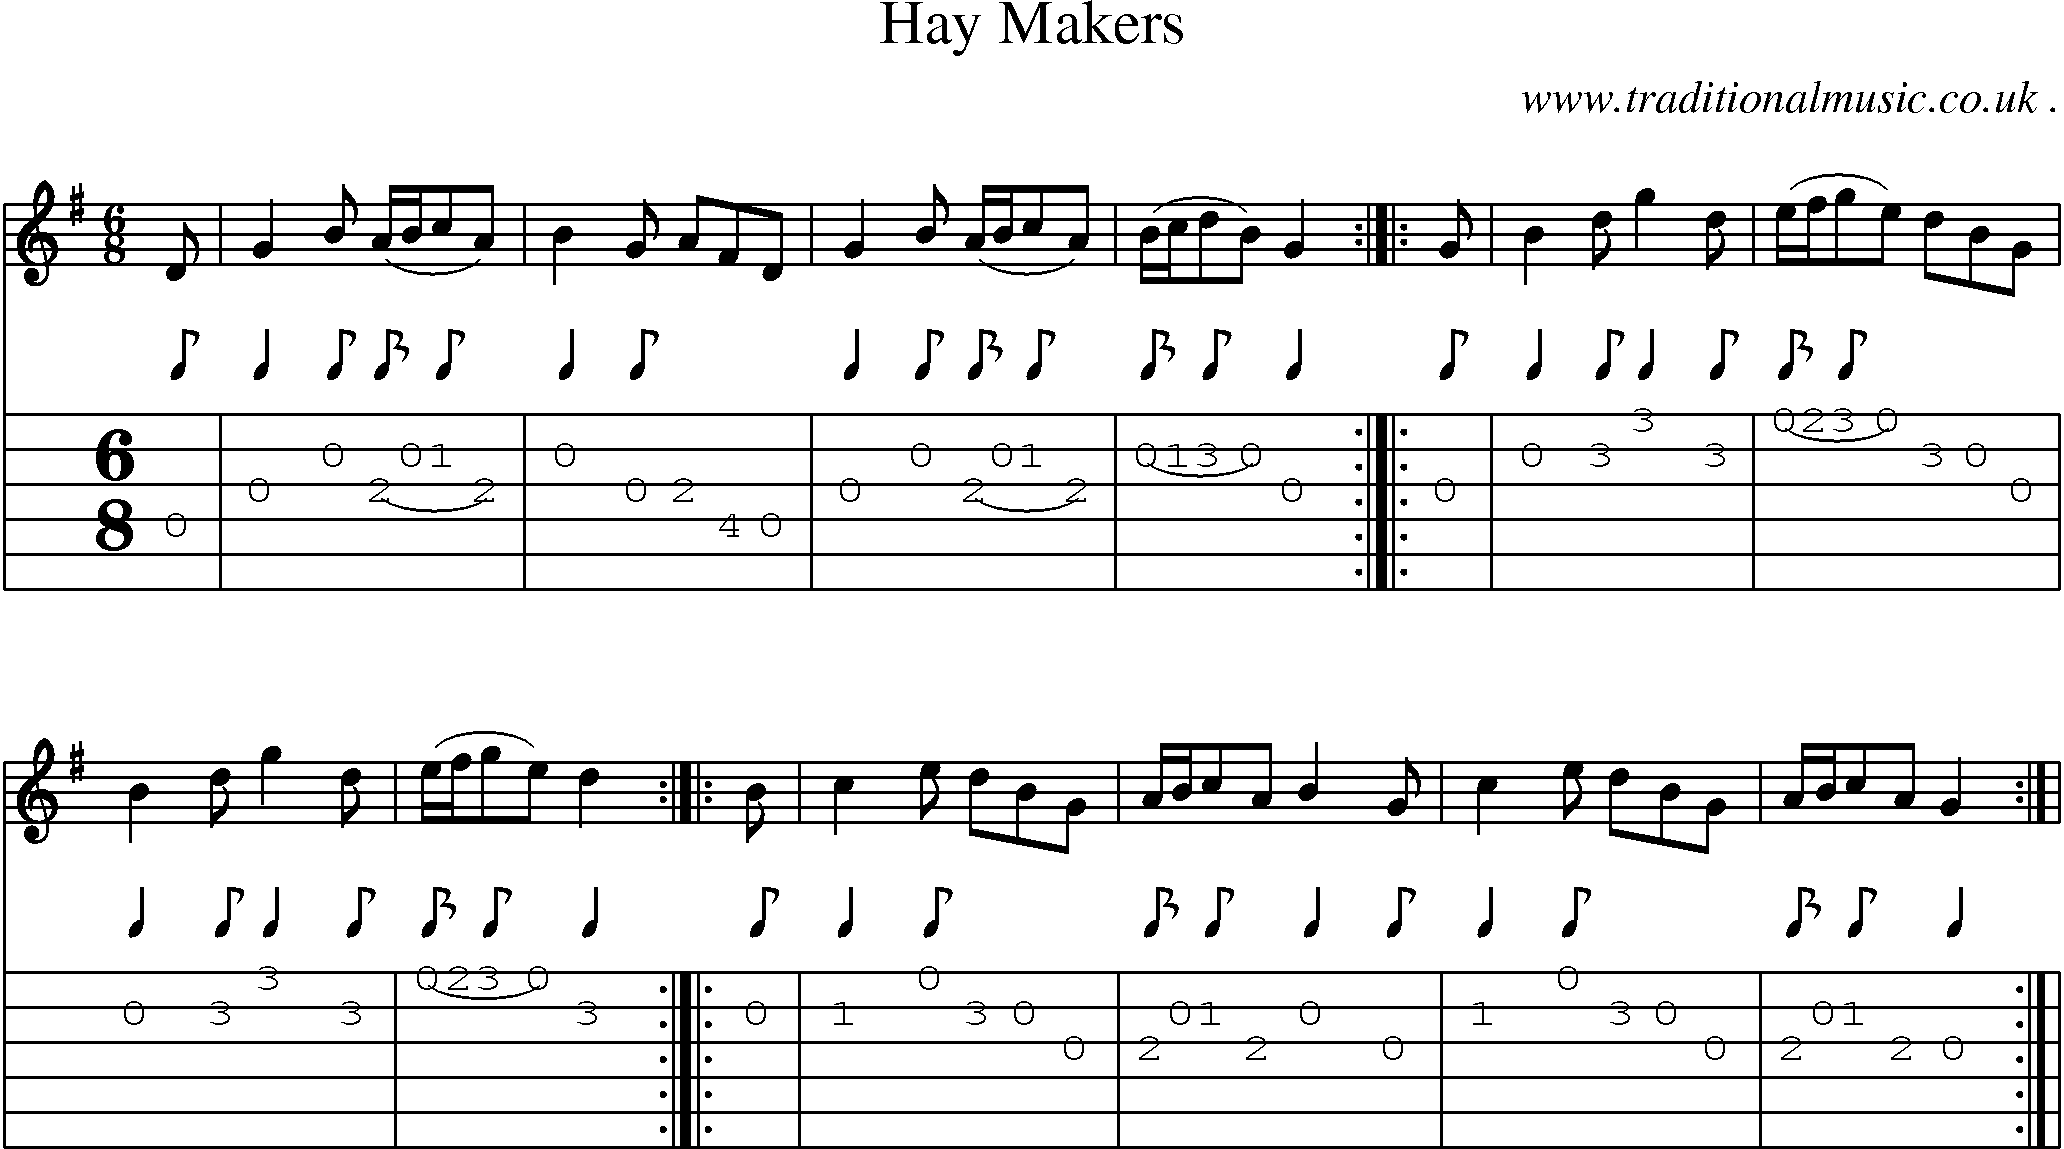 Sheet-Music and Guitar Tabs for Hay Makers